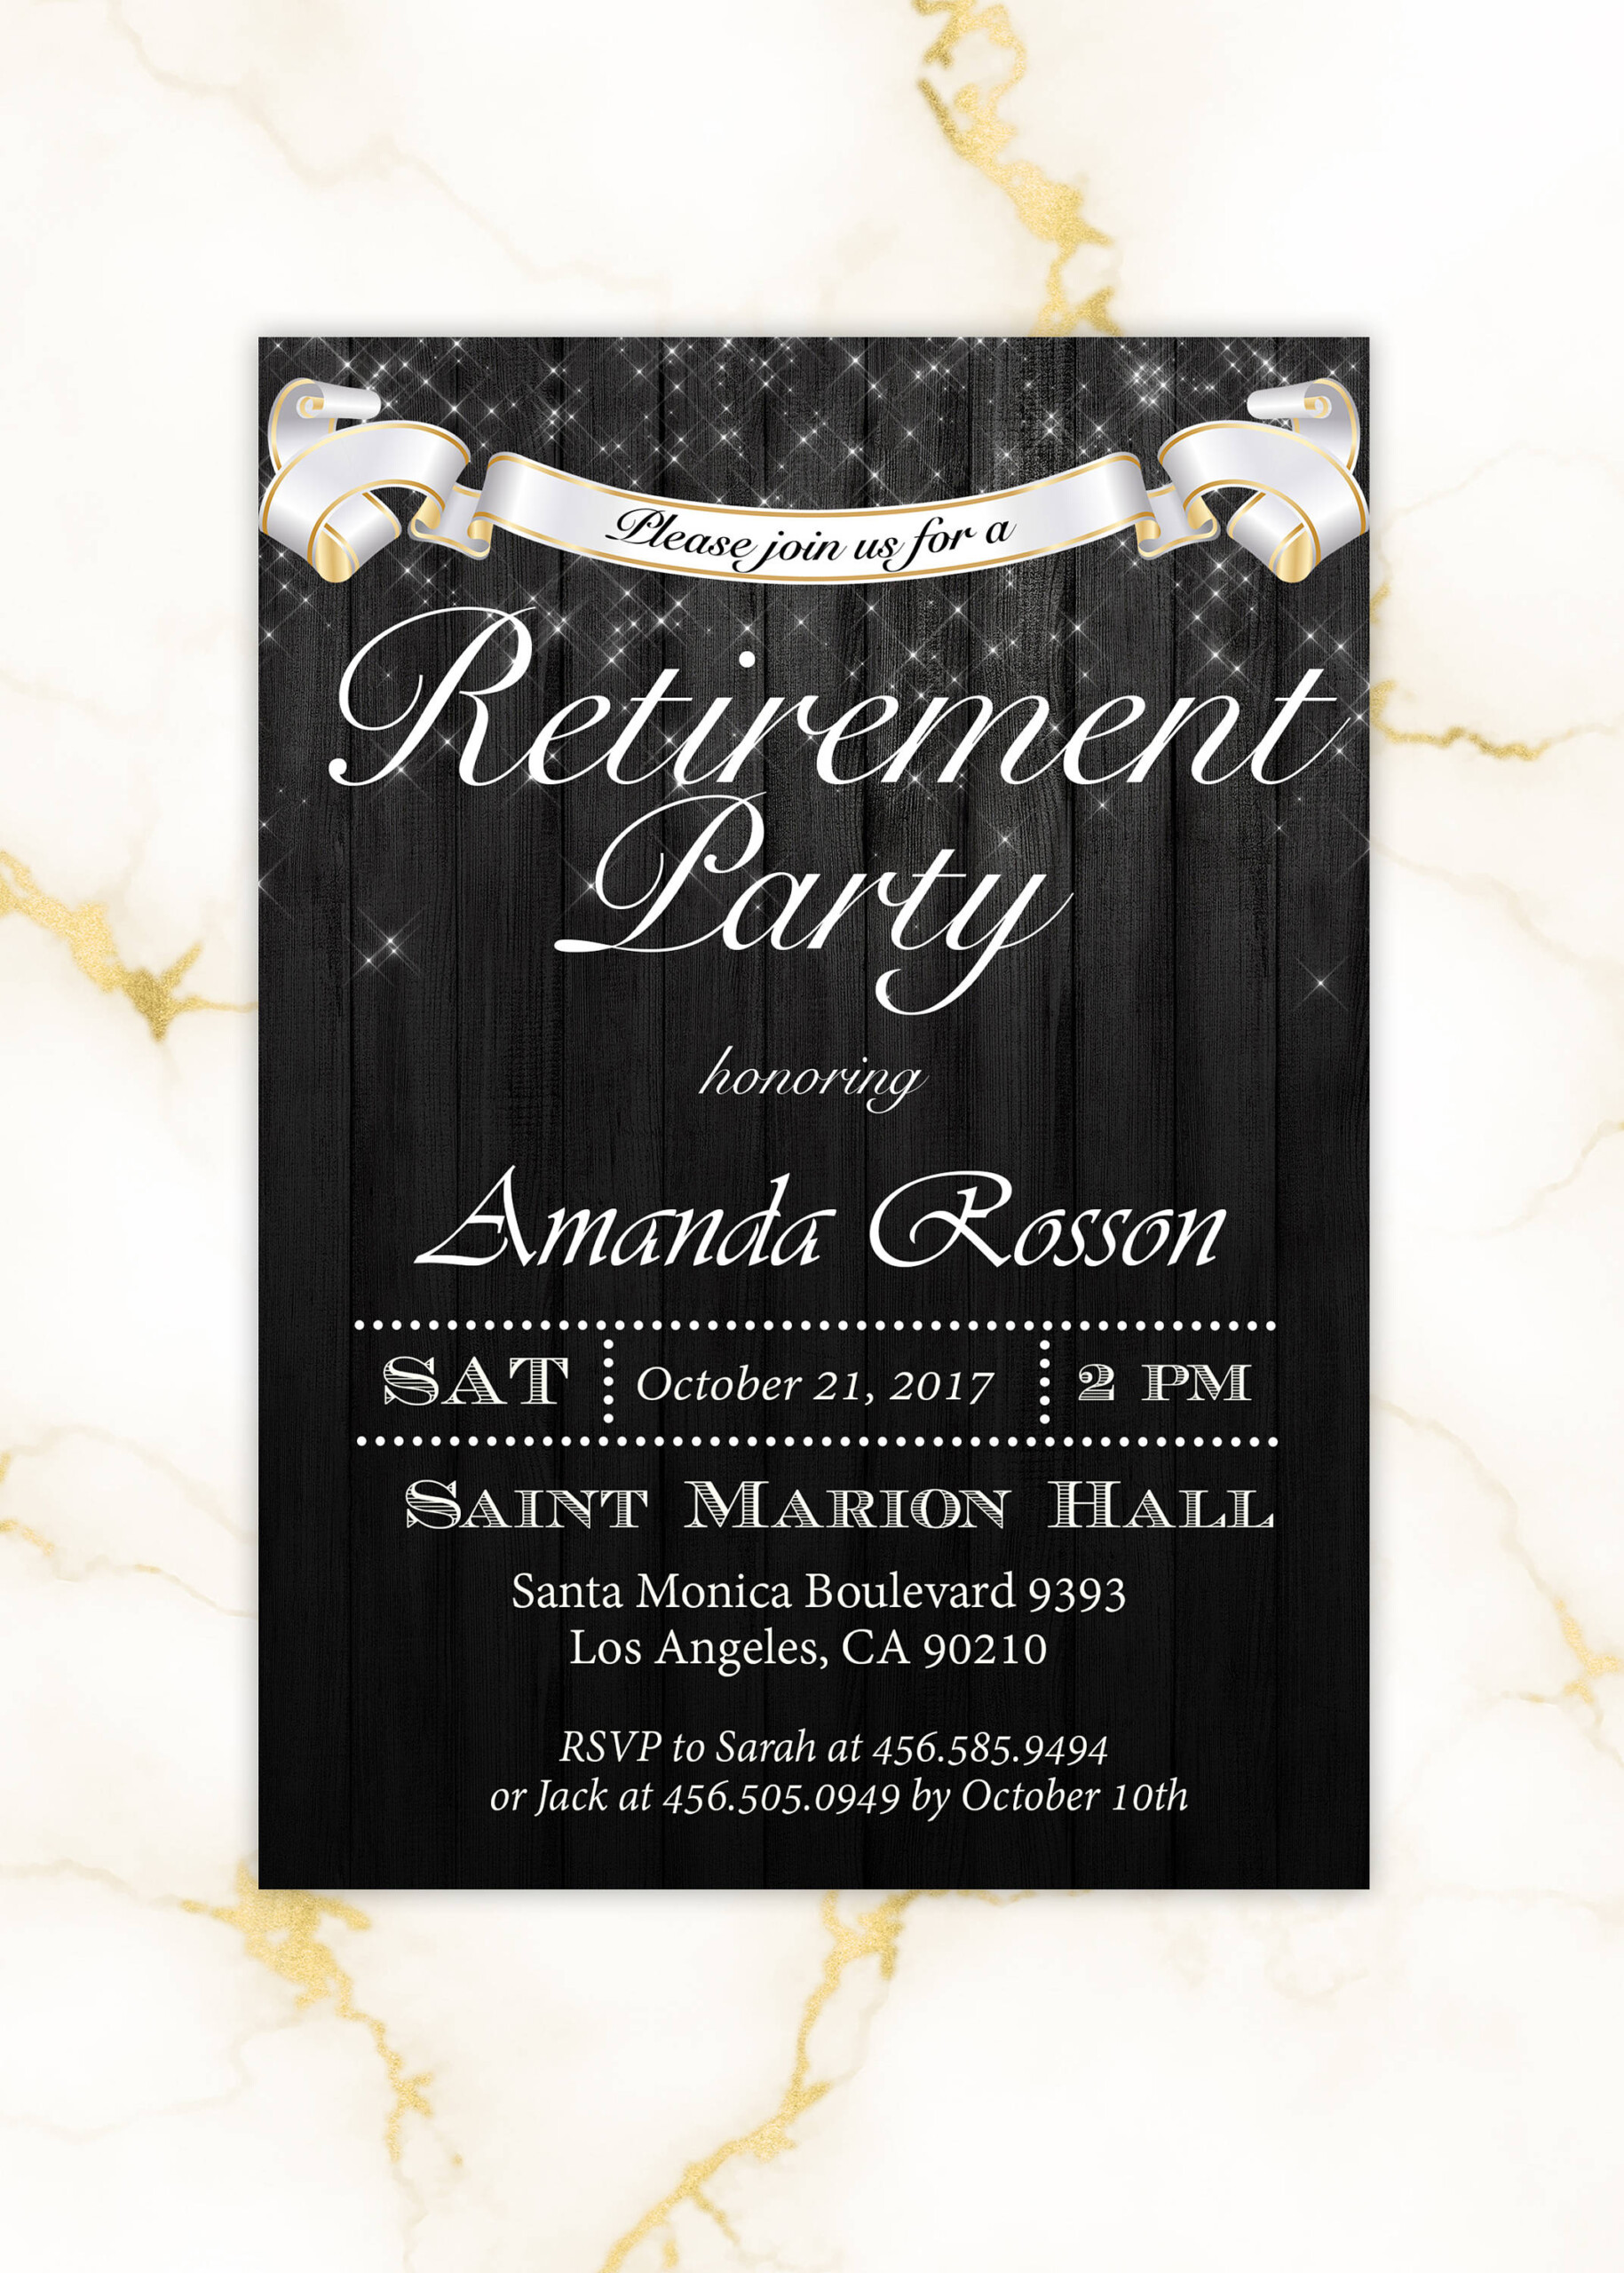 FREE 25 Retirement Party Invitation Designs Examples In Publisher 